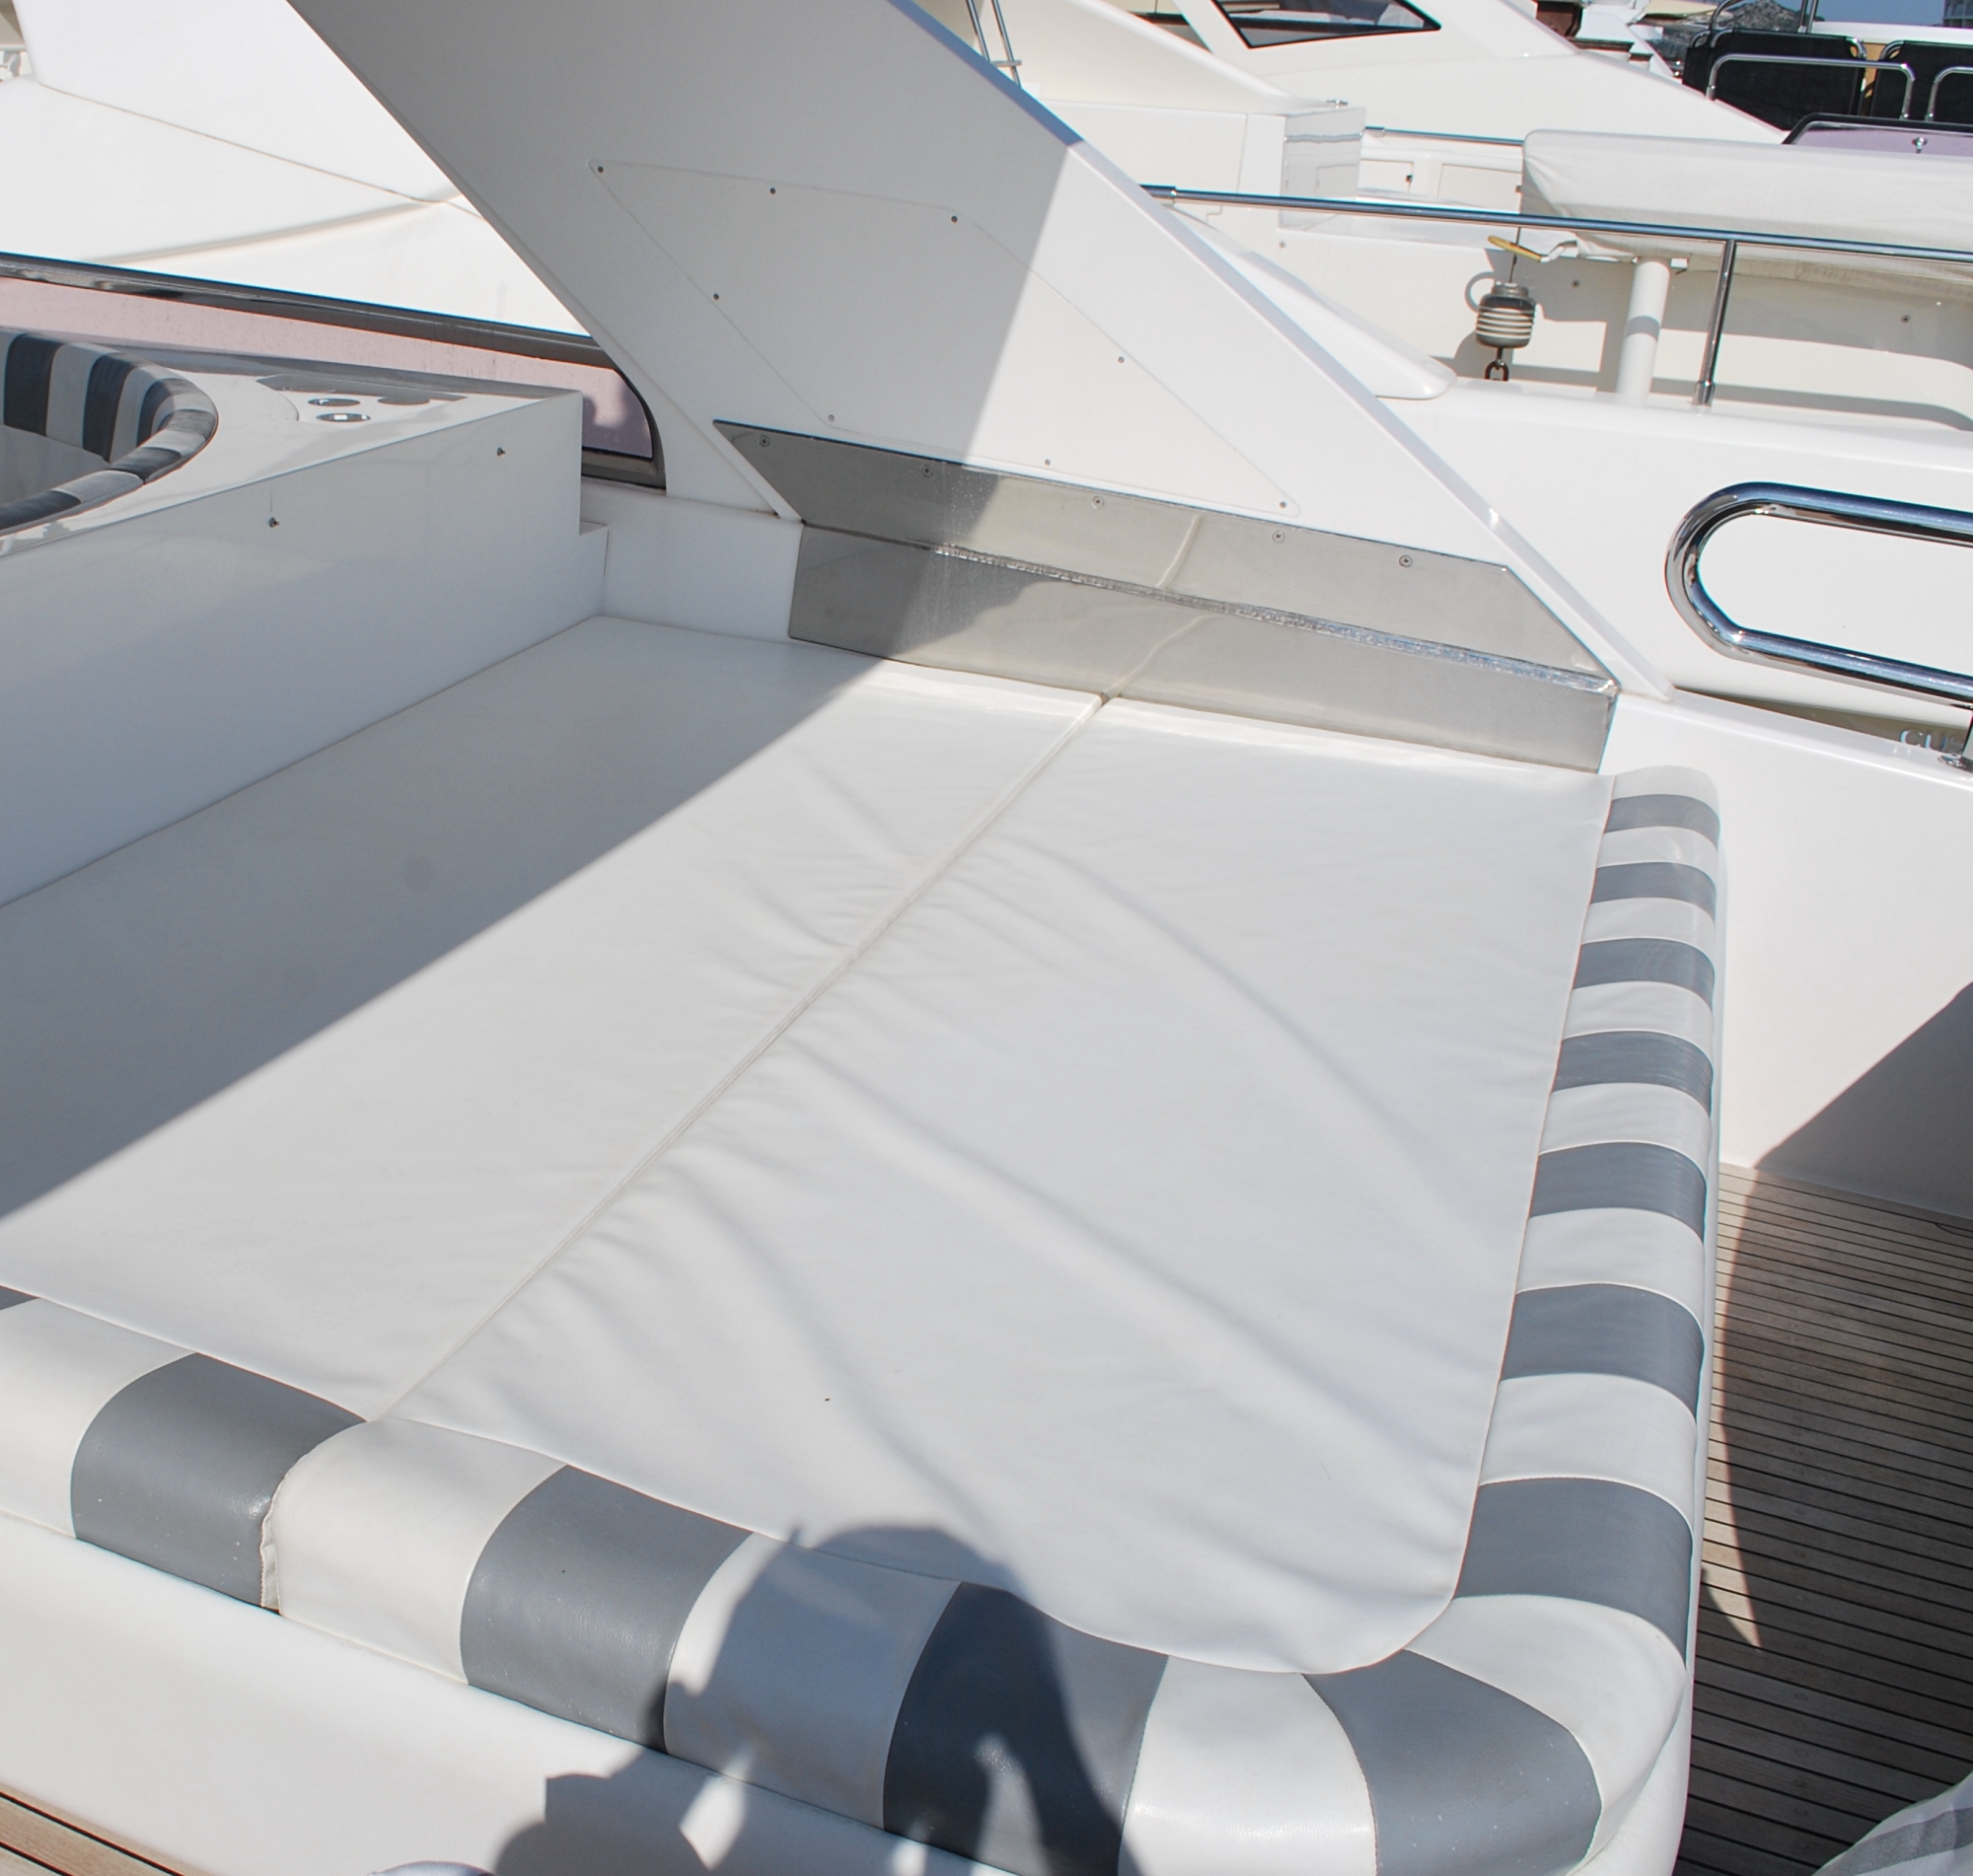 Elegance 78ft yacht bow sunbed before photo, with dominating white colour and striped edging, needs new life and new style.